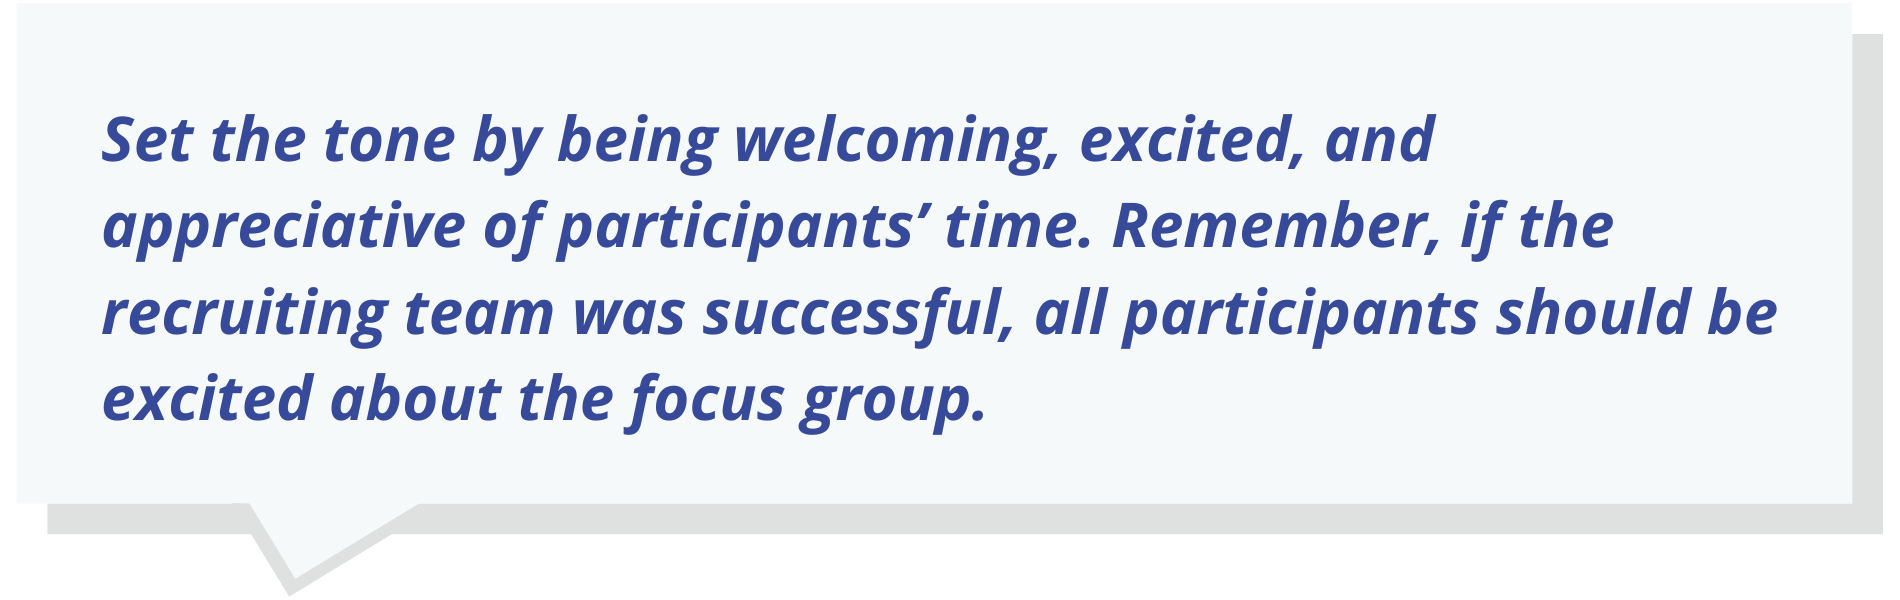 Set the tone by being welcoming, excited, and appreciative of participants’ time. Remember, if the recruiting team was successful, all participants should be excited about the focus group.